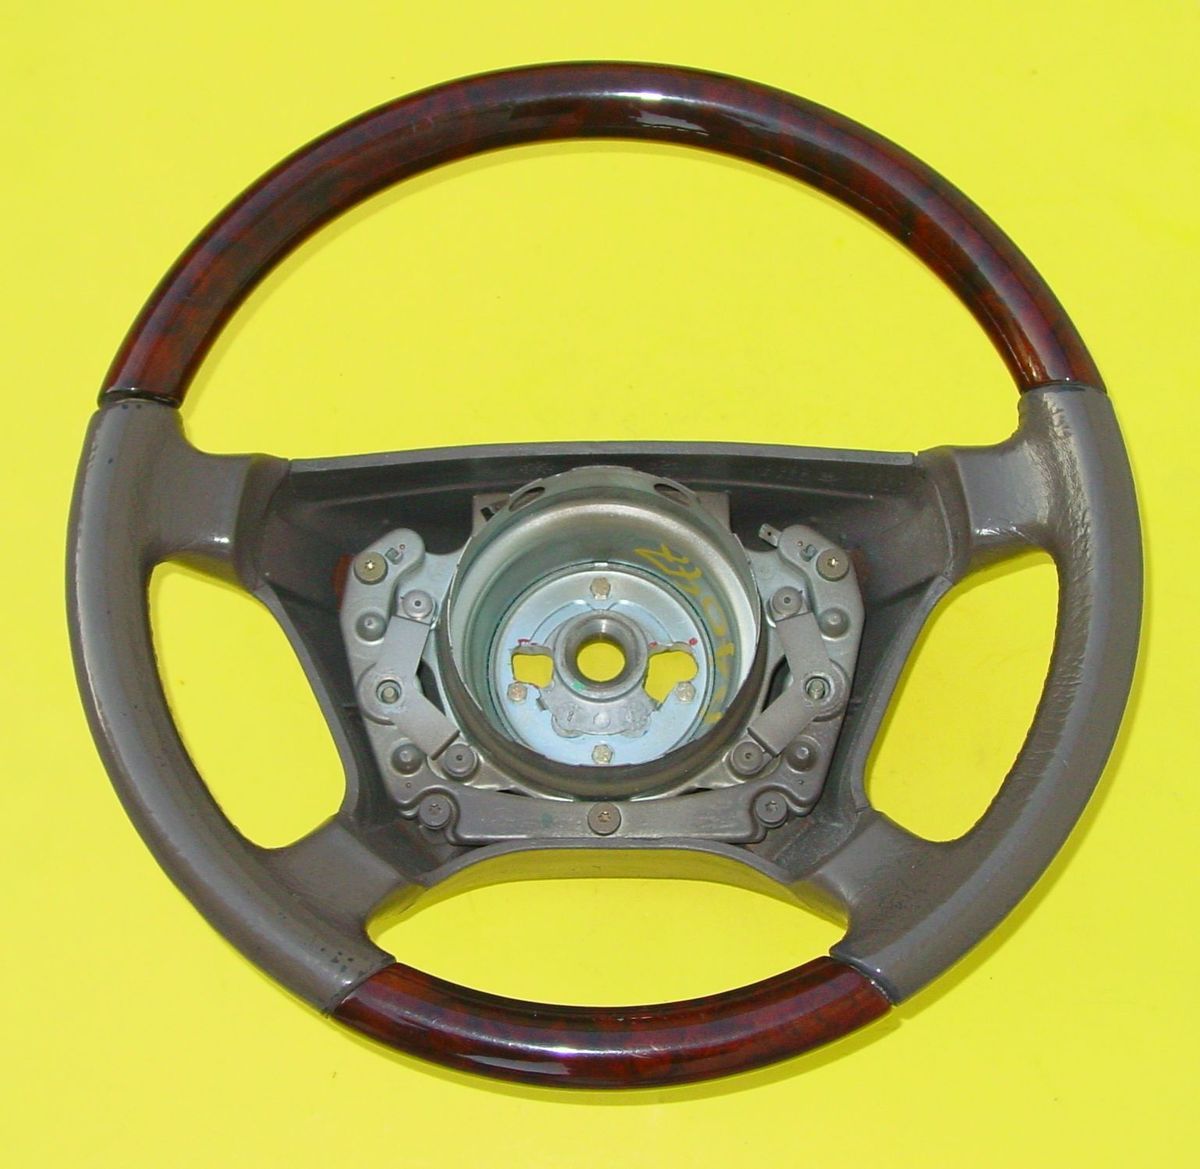 Genuine Burl Wood Steering Wheel for Mercedes CL s Class 1994 to 1999